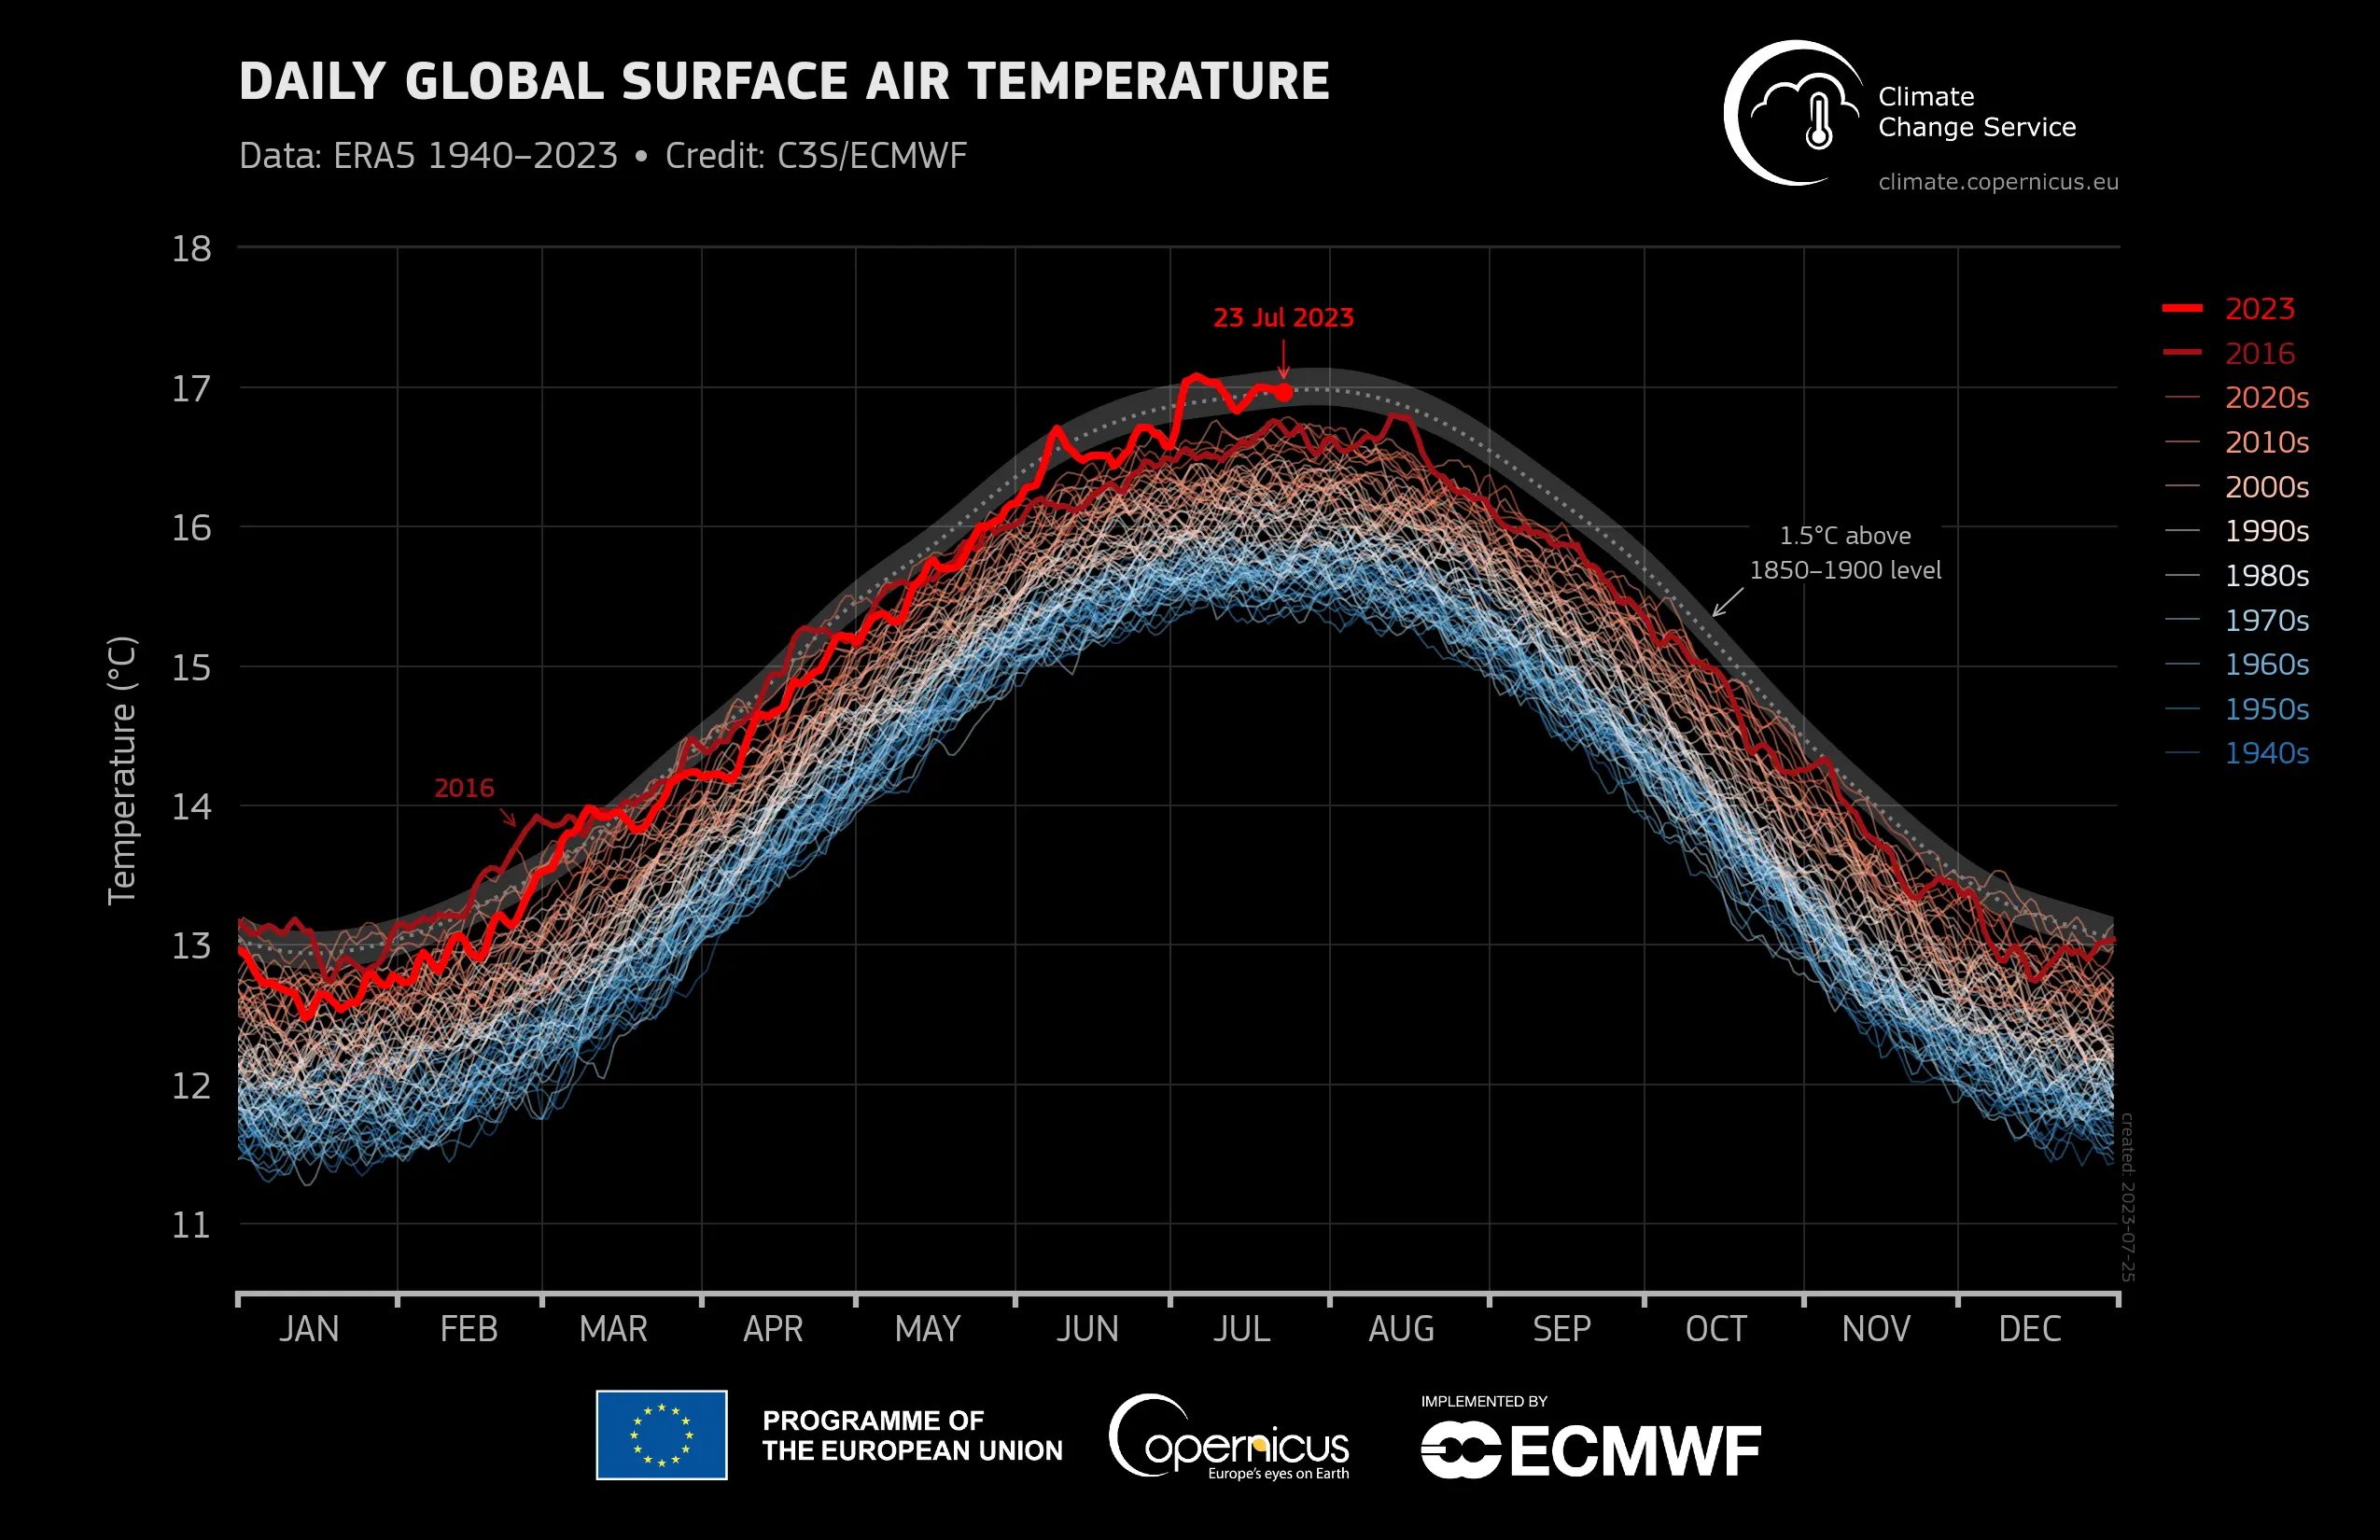 Global daily surface air temperature (°C) from 1 January 1940 to 23 July 2023, plotted as time series for each year. 2023 and 2016 are shown with thick lines shaded in bright red and dark red, respectively. Other years are shown with thin lines and shaded according to the decade, from blue (1940s) to brick red (2020s).